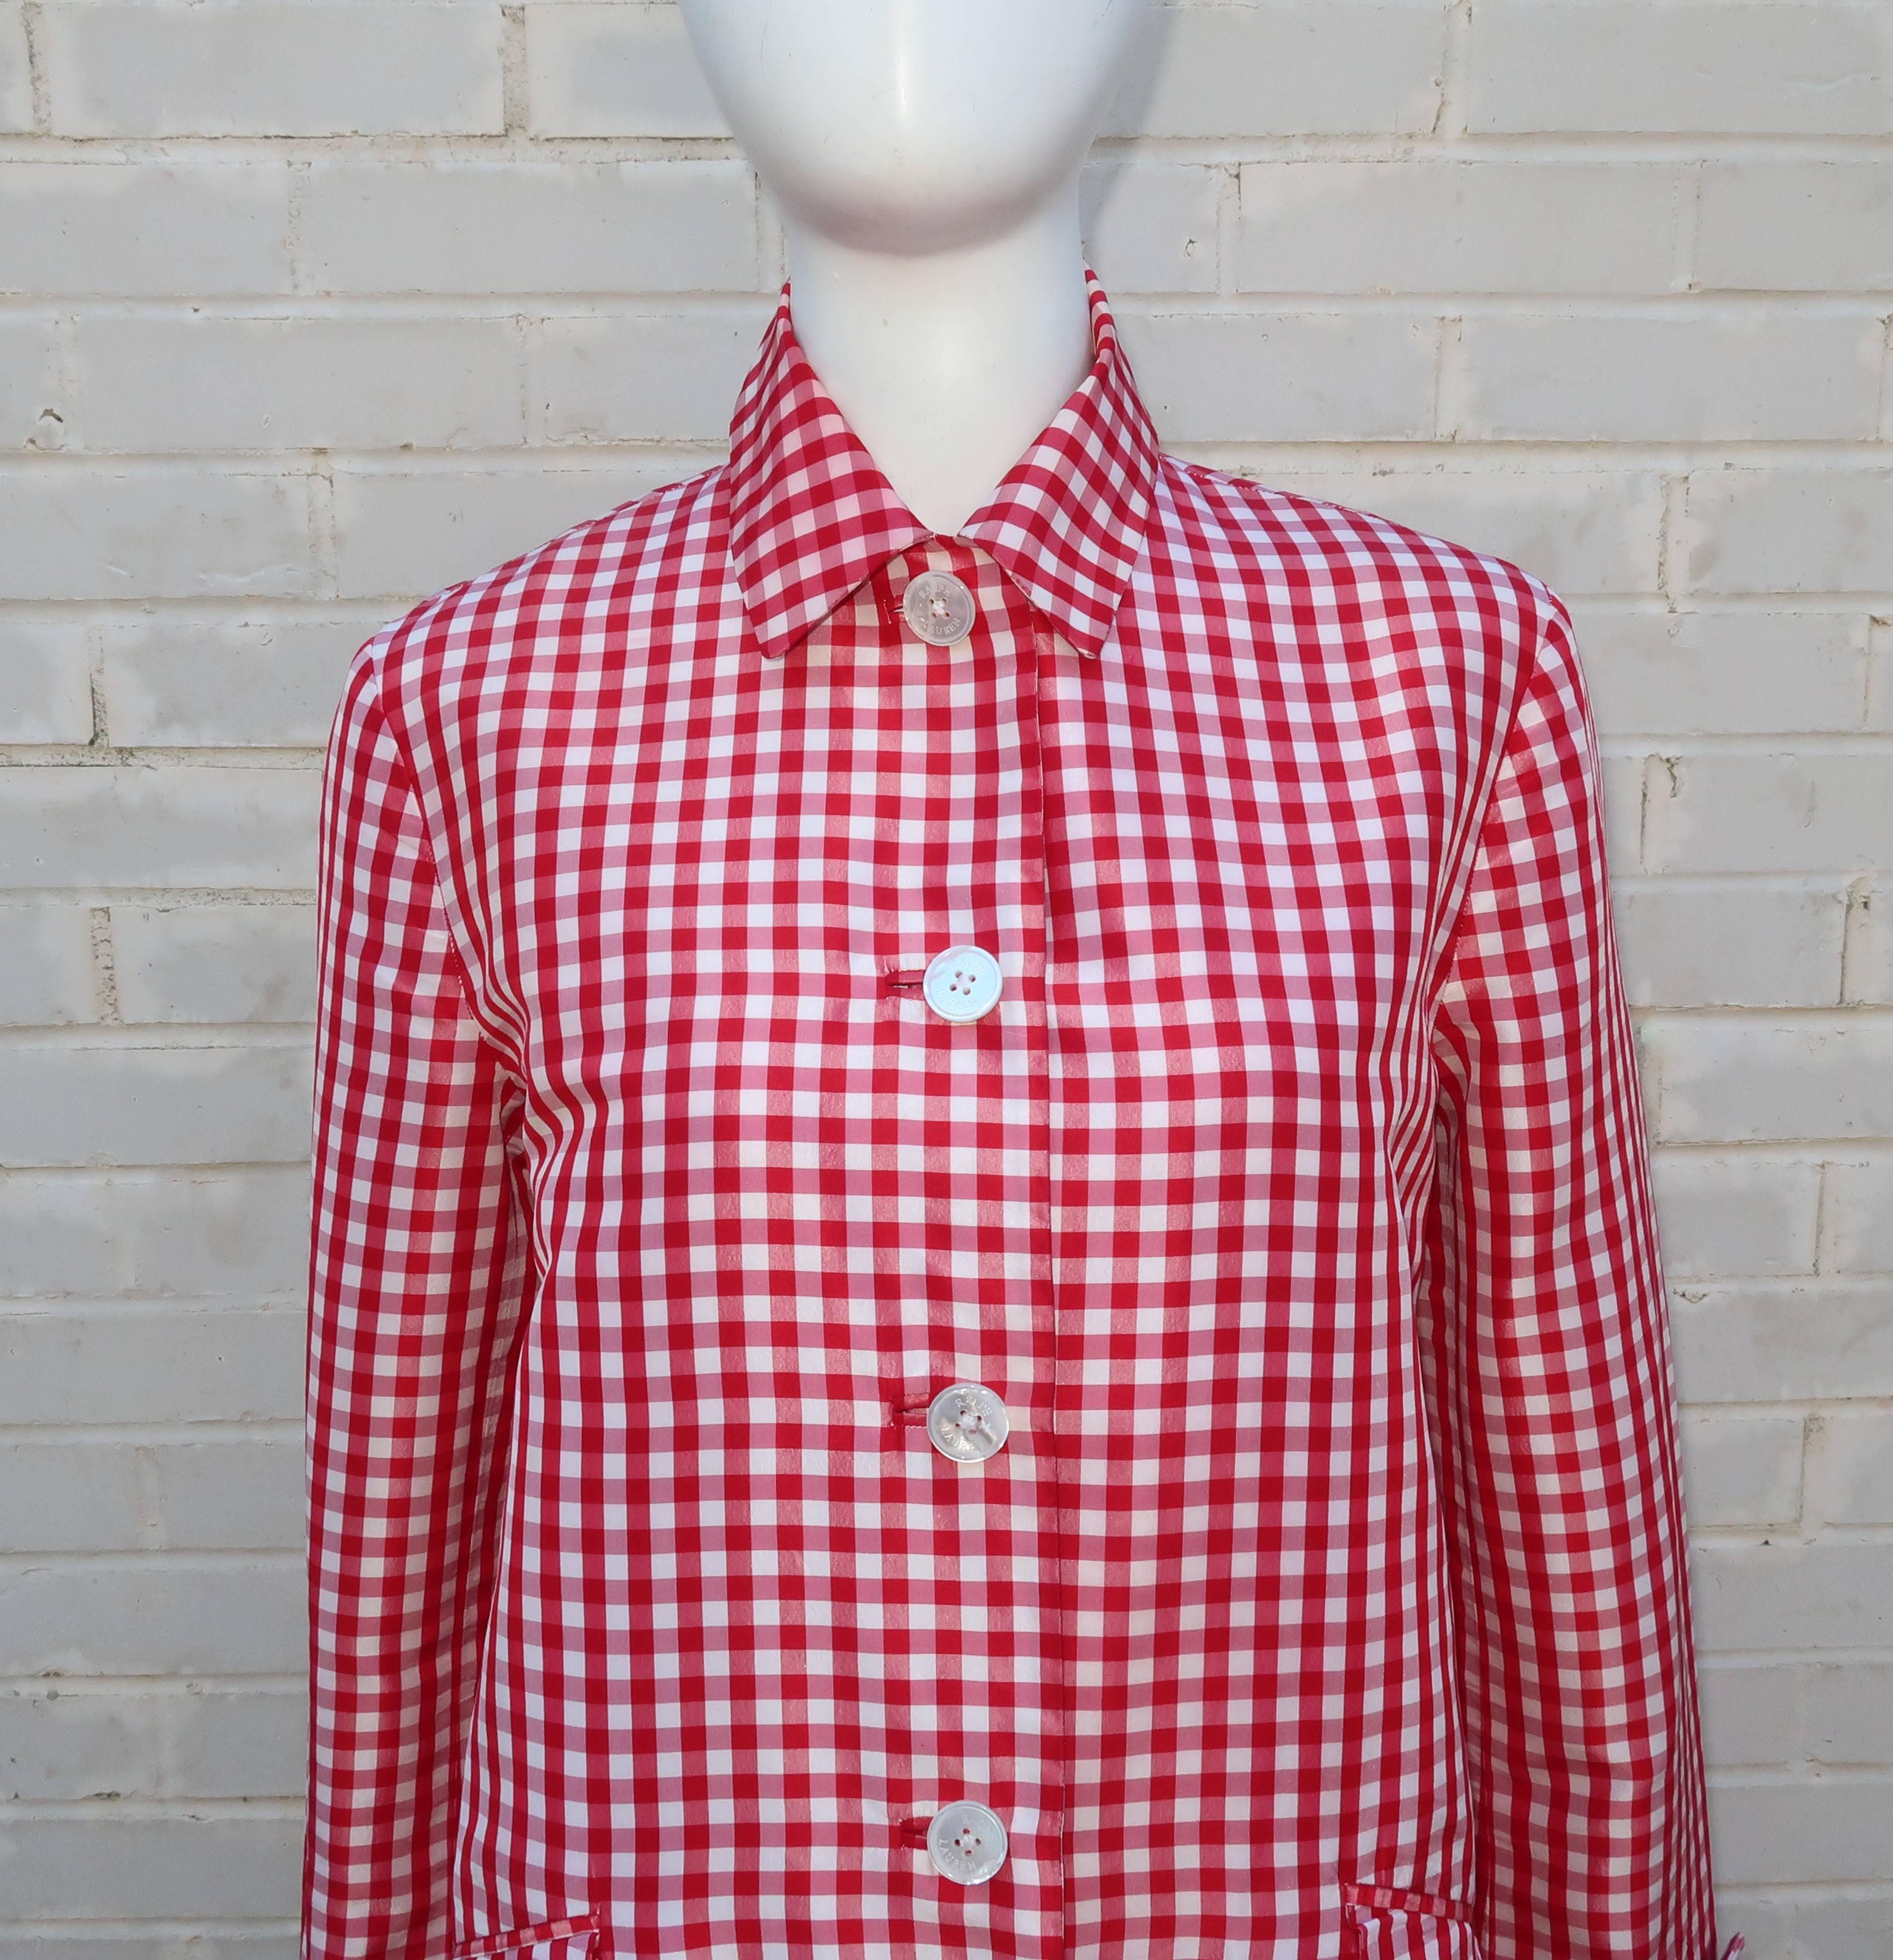 Crisp all-American good looks abound in this 1990's silk red & white gingham topper with trench coat styling by Ralph Lauren.  The coat buttons at the front with flap front pockets and cuff details.  The large mother-of-pearl buttons are logo